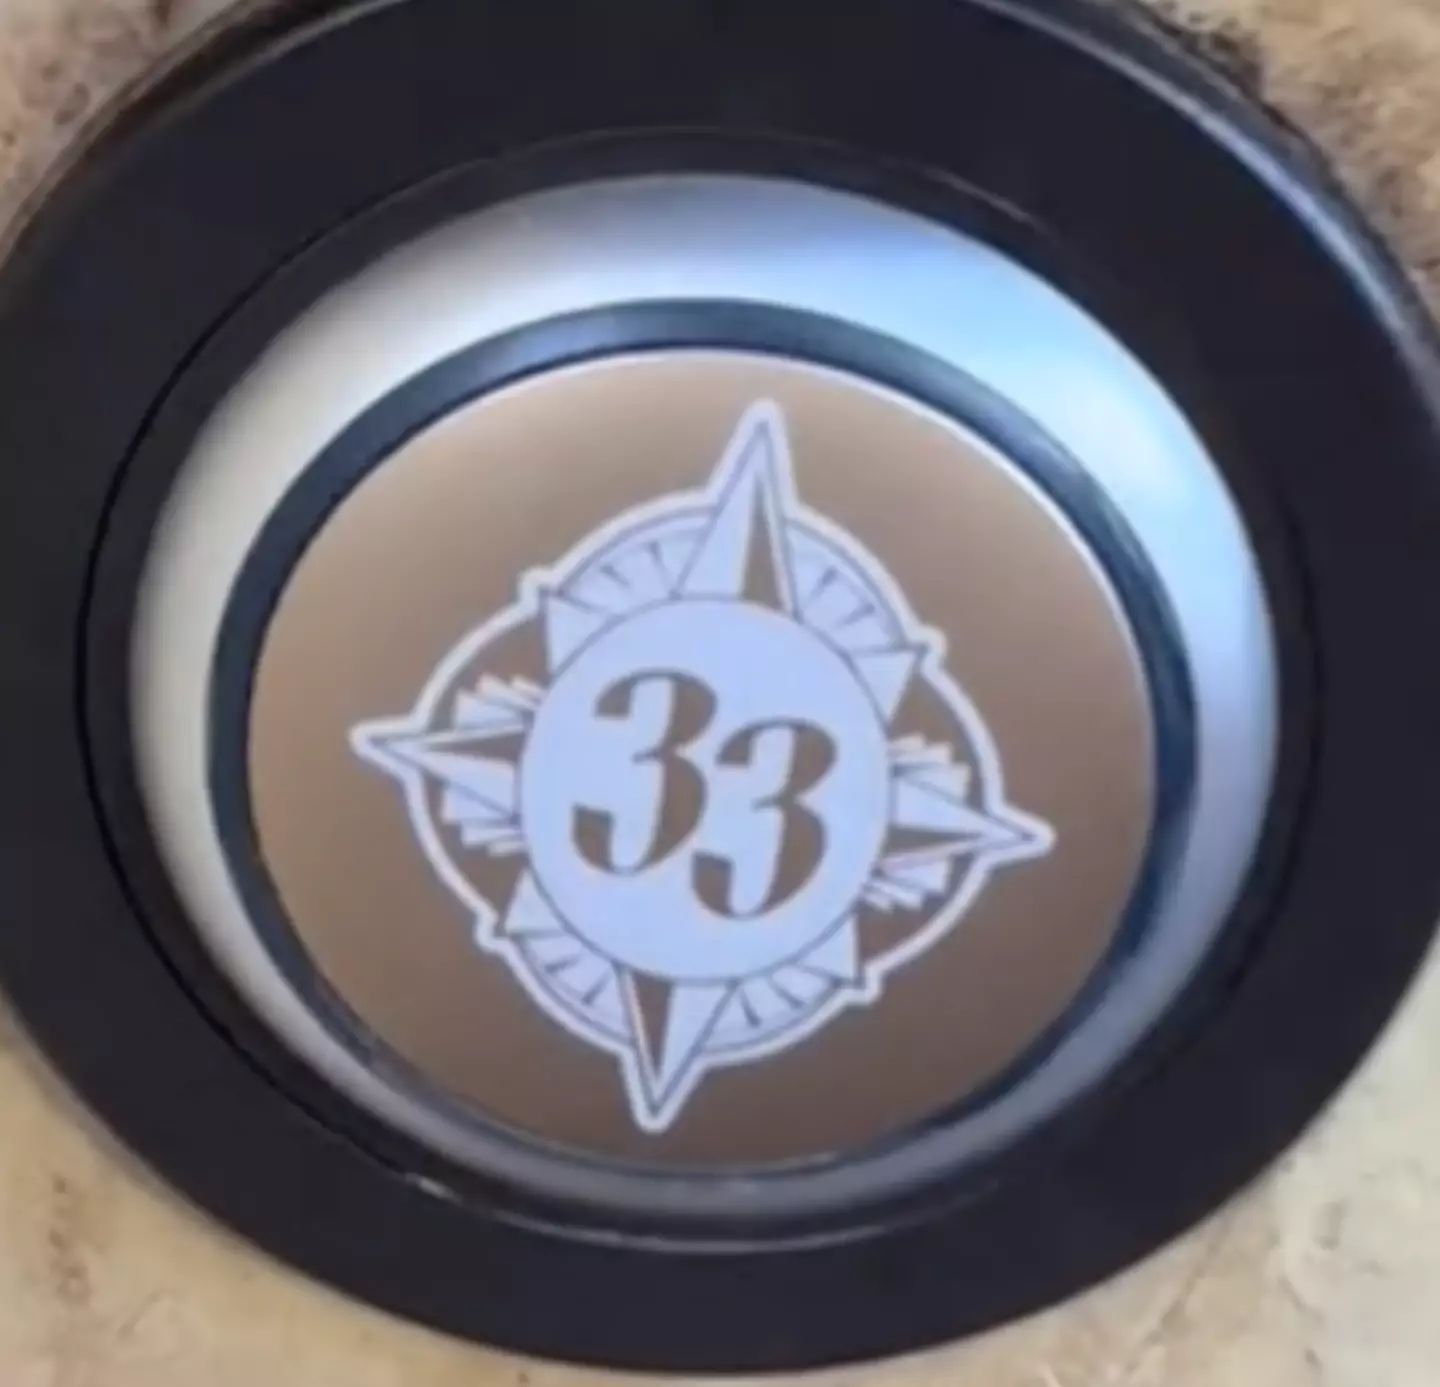 The Club 33 logo on show at the Disneyland park in Anaheim, California.